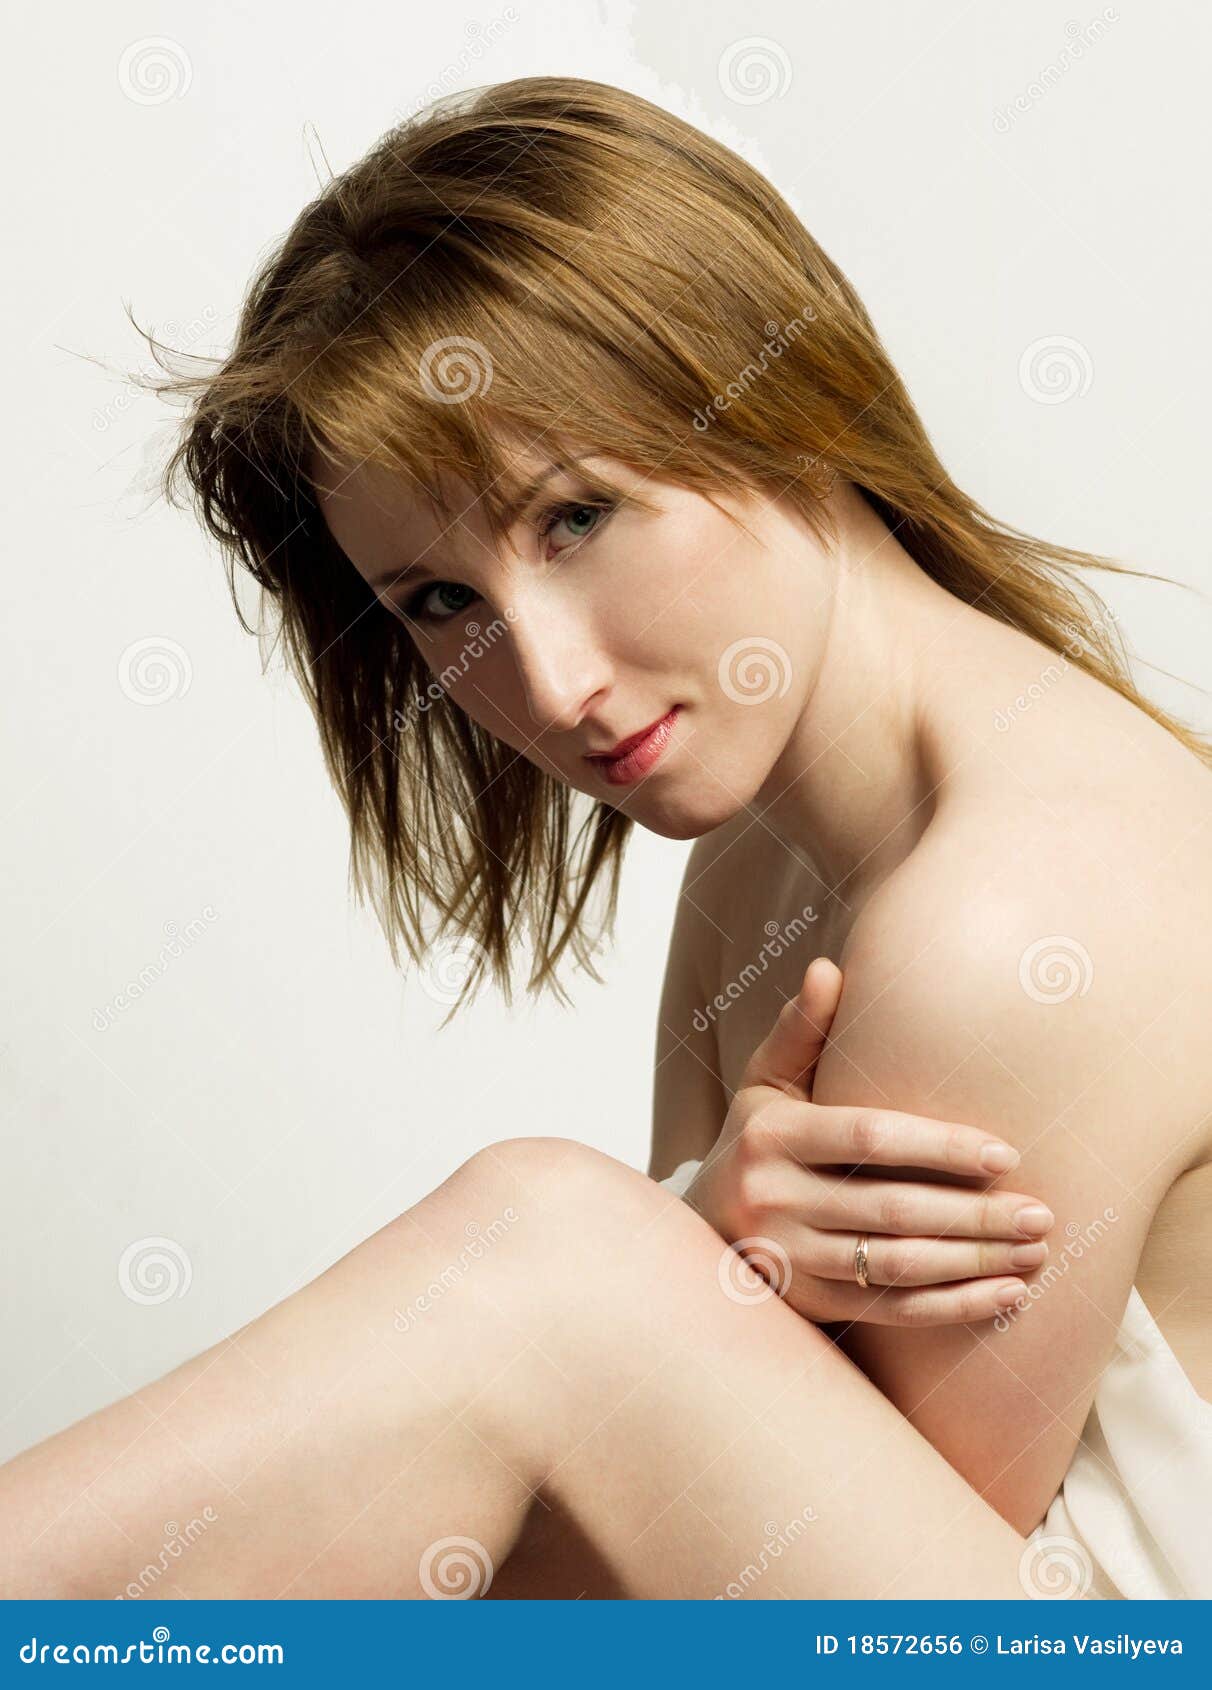 Young Naked Woman Picture pic